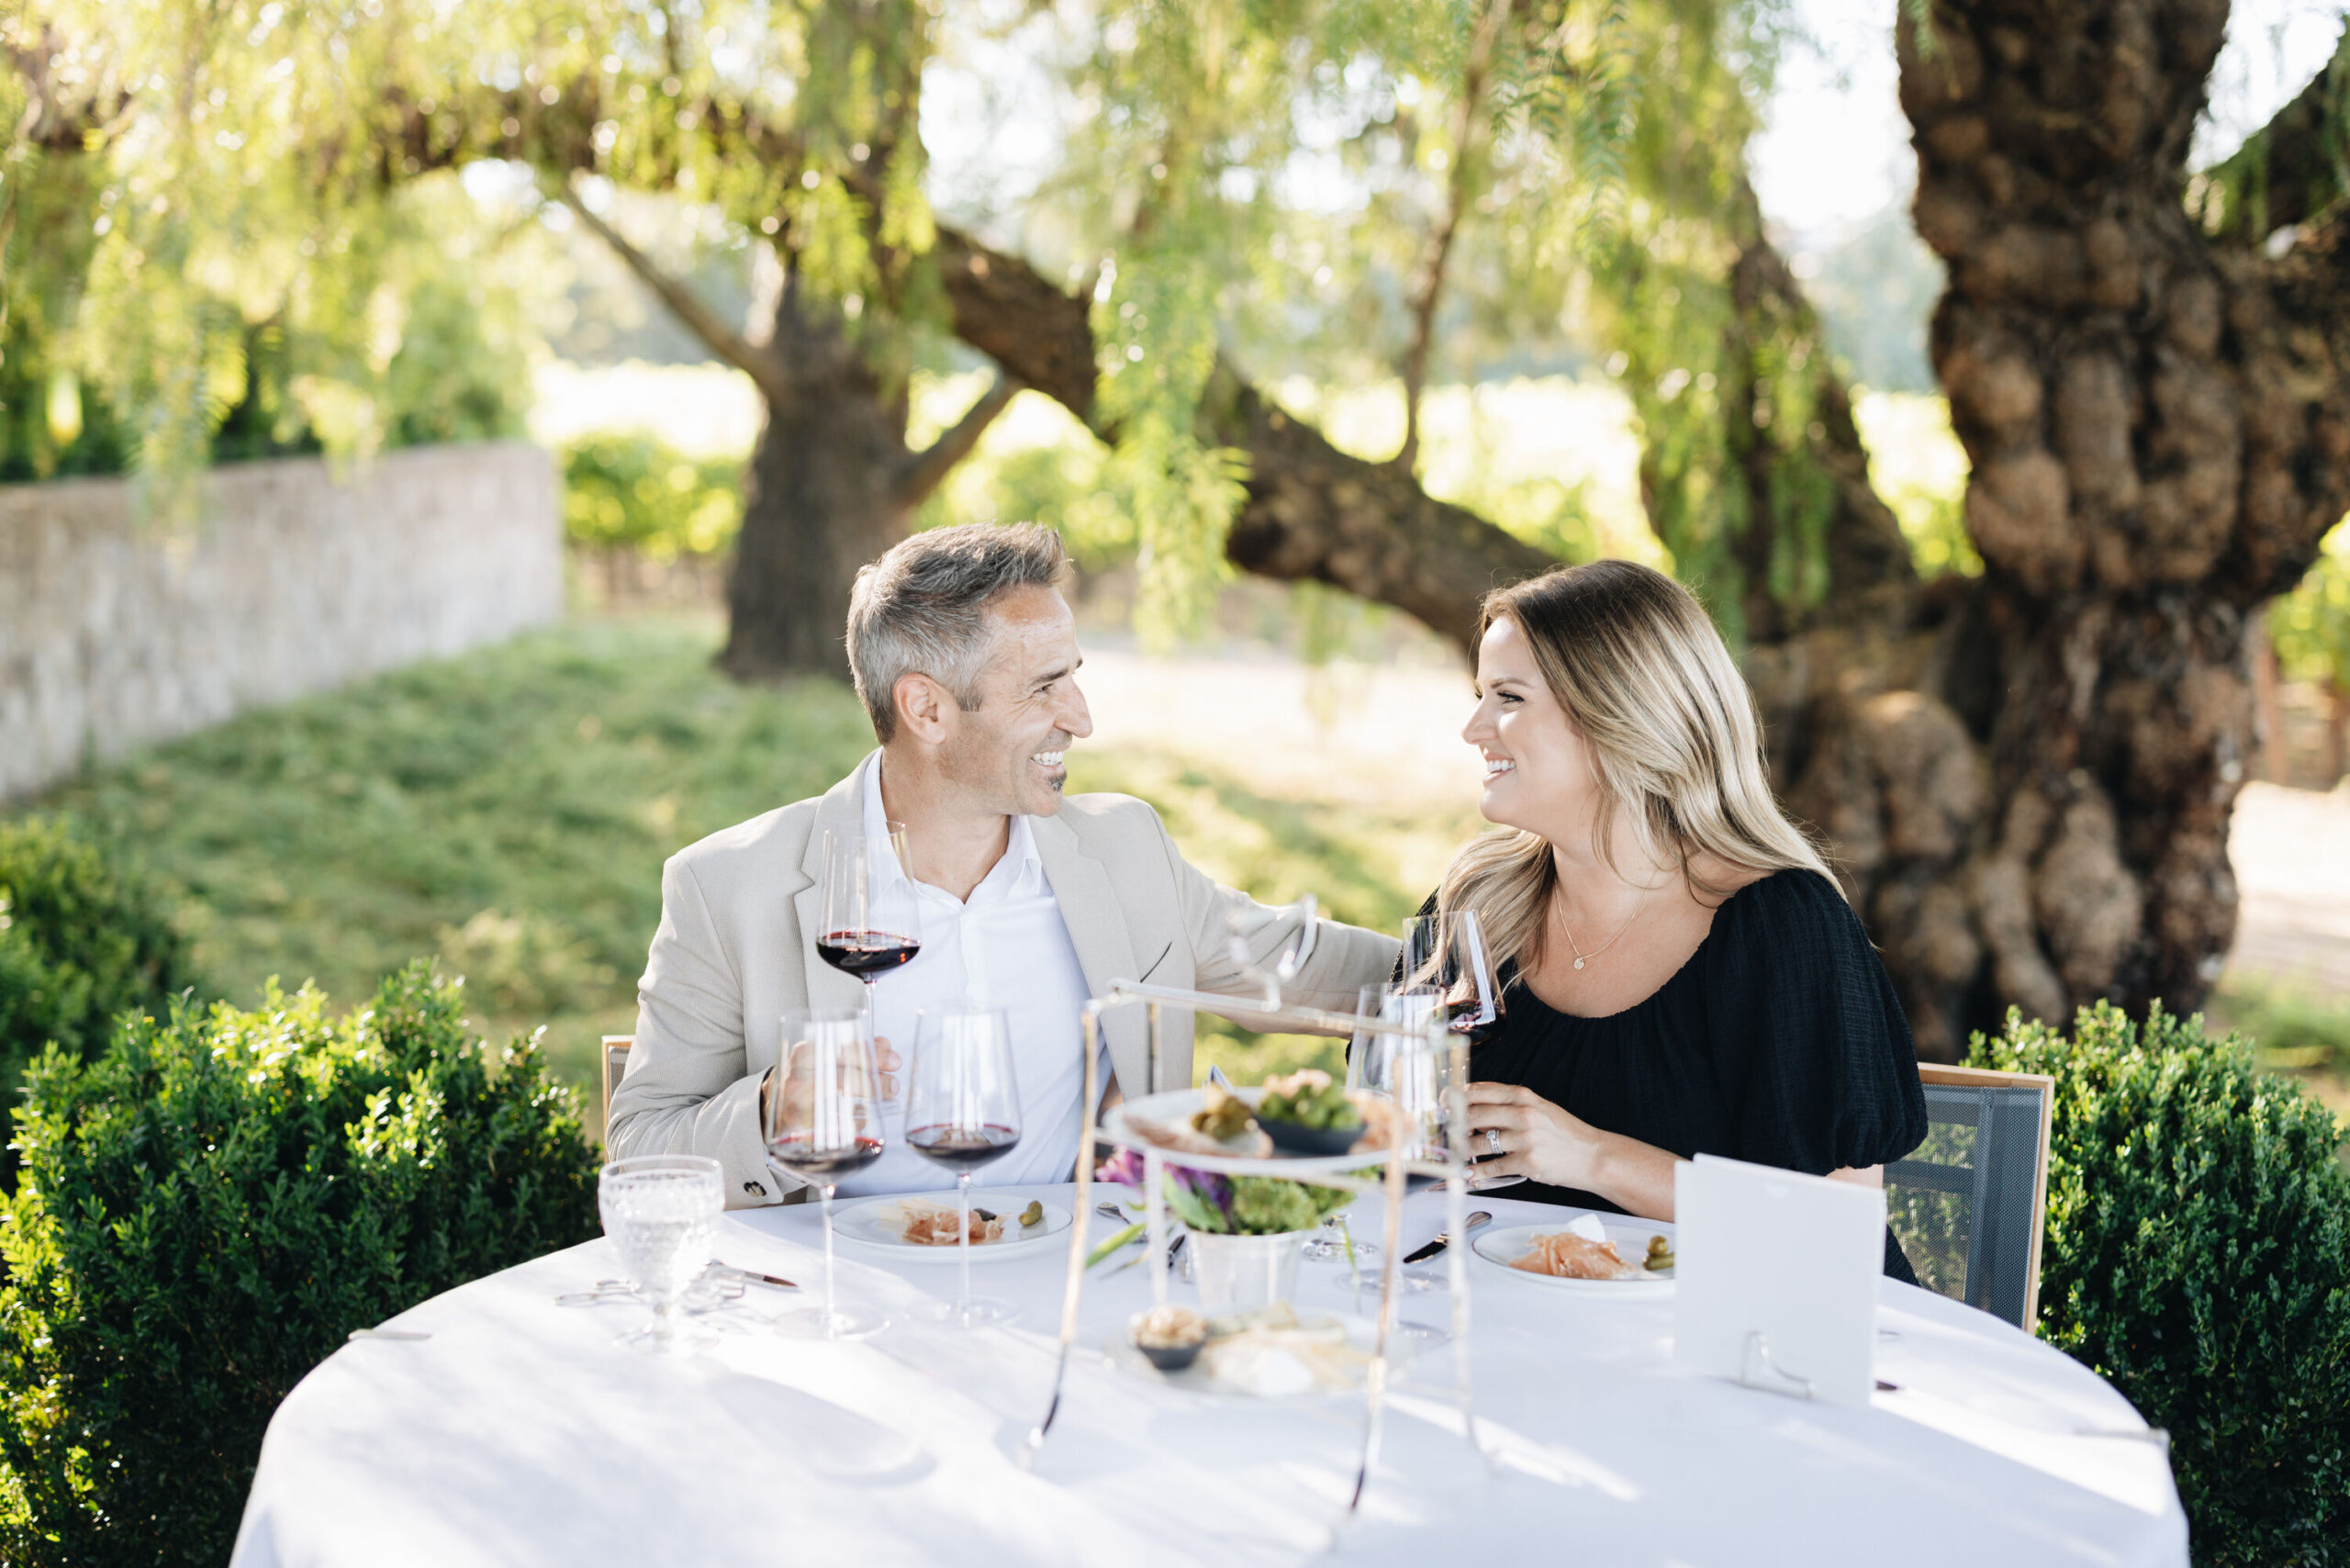 A couple enjoying a tasting outdoors at a table with glasses of wine and selection of cheese and meats on a plate at Heitz Cellar.